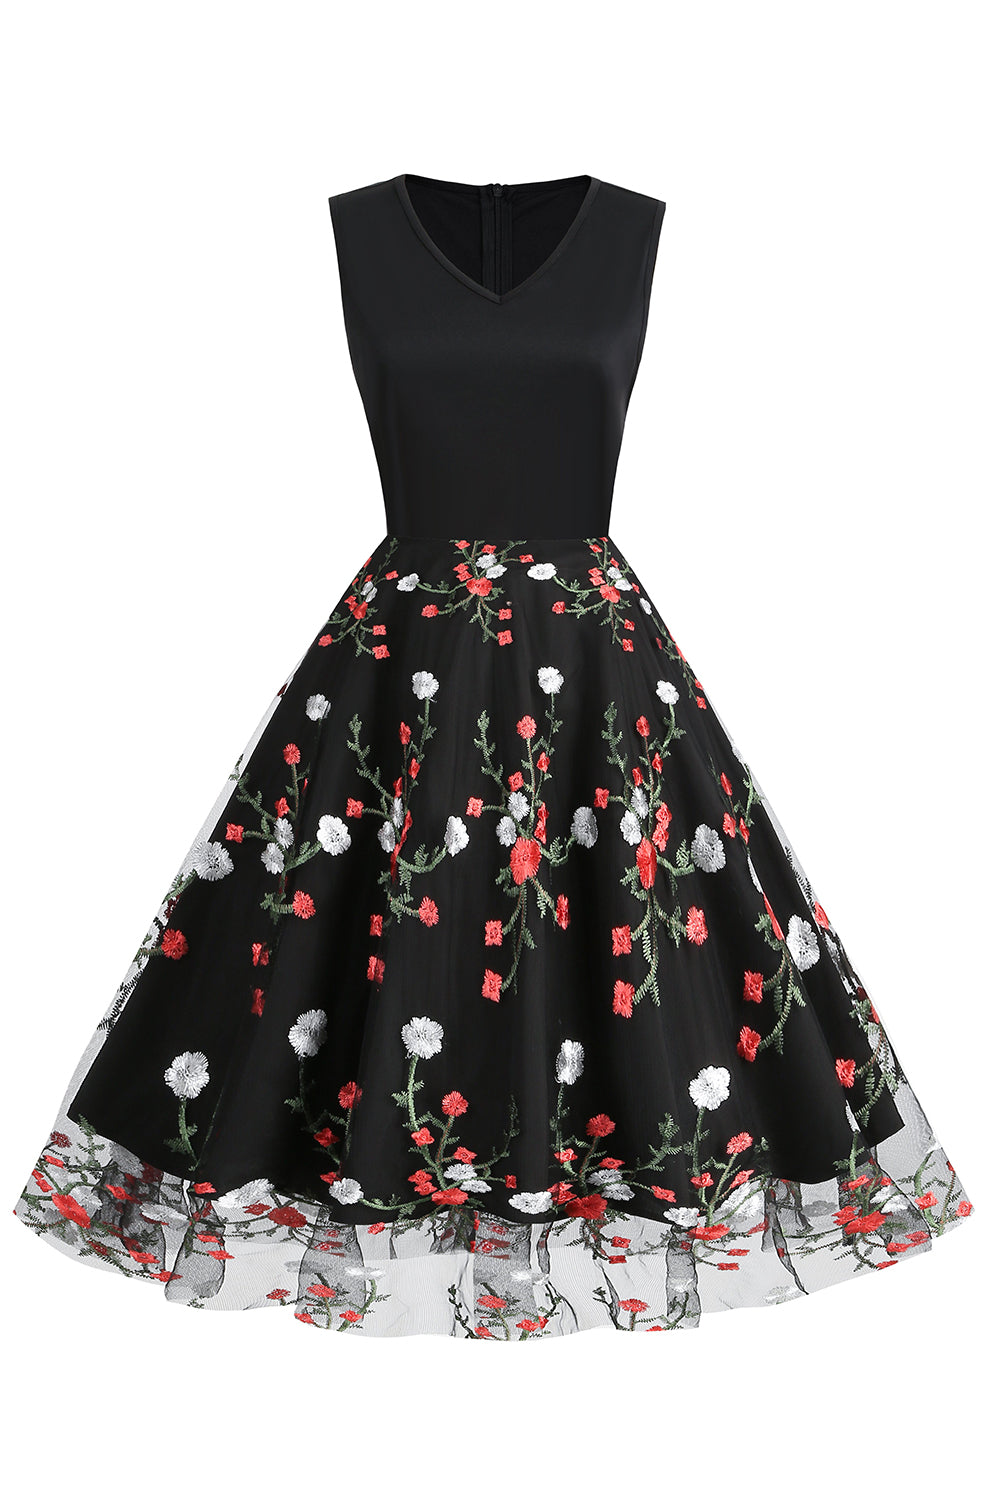 Black Vintage 1950s Dress with Embroidery